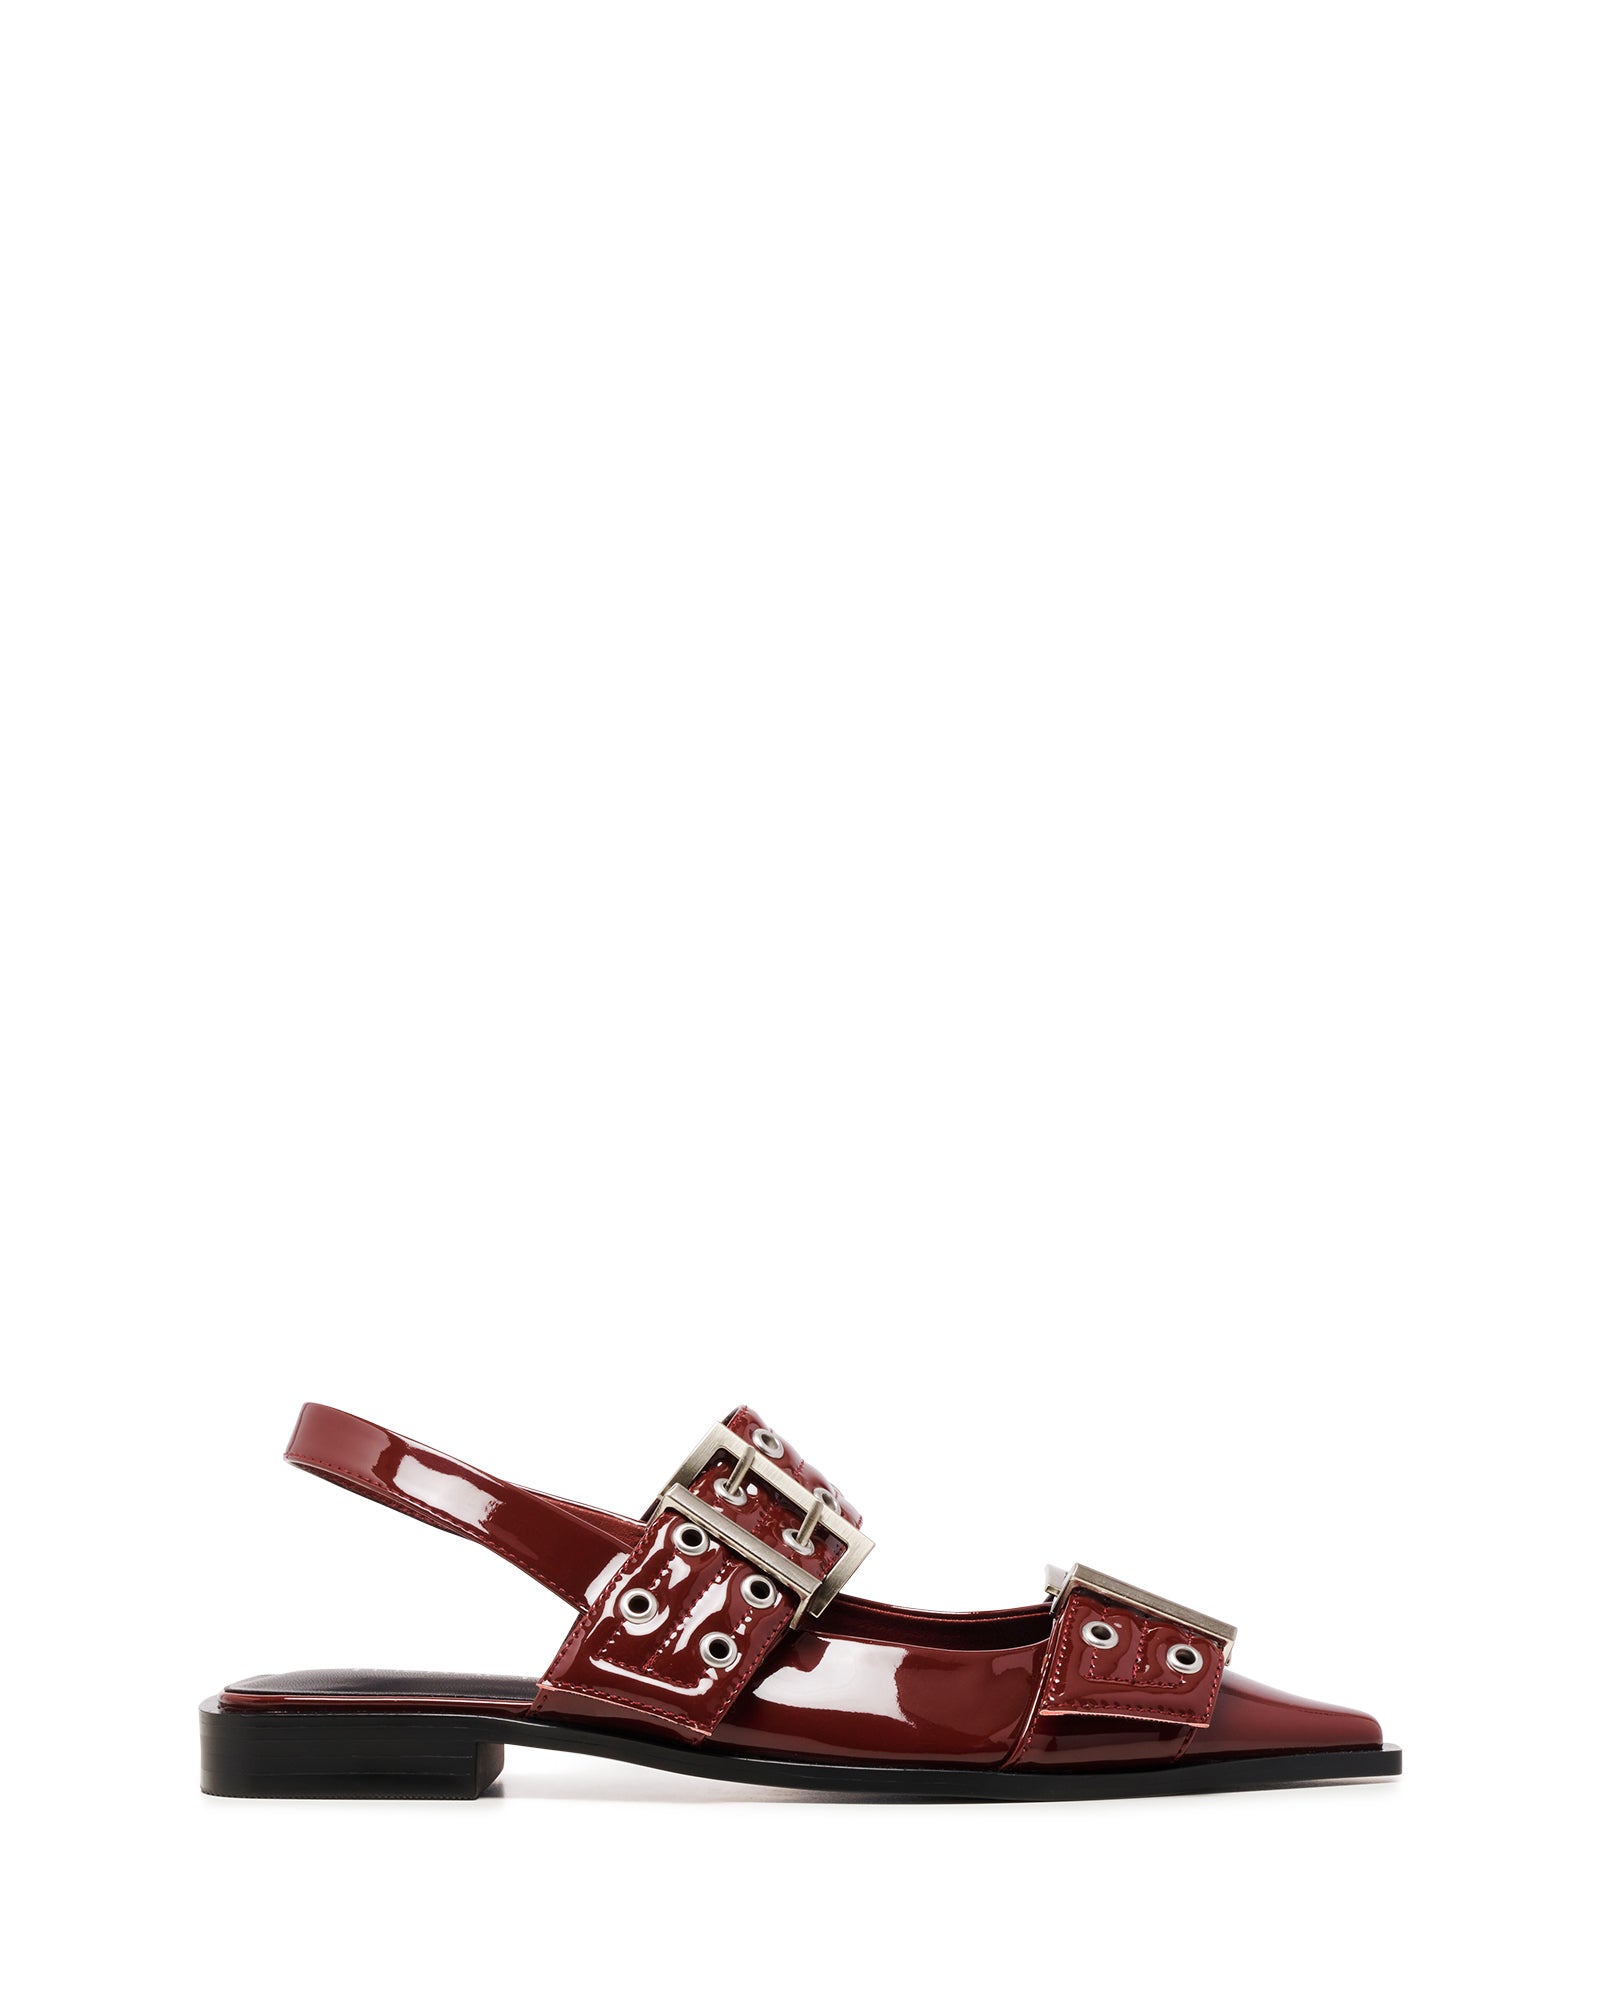 Matilda Pointed Flat Cherry Patent- PRE ORDER DUE FOR DISPATCH 15TH MAY